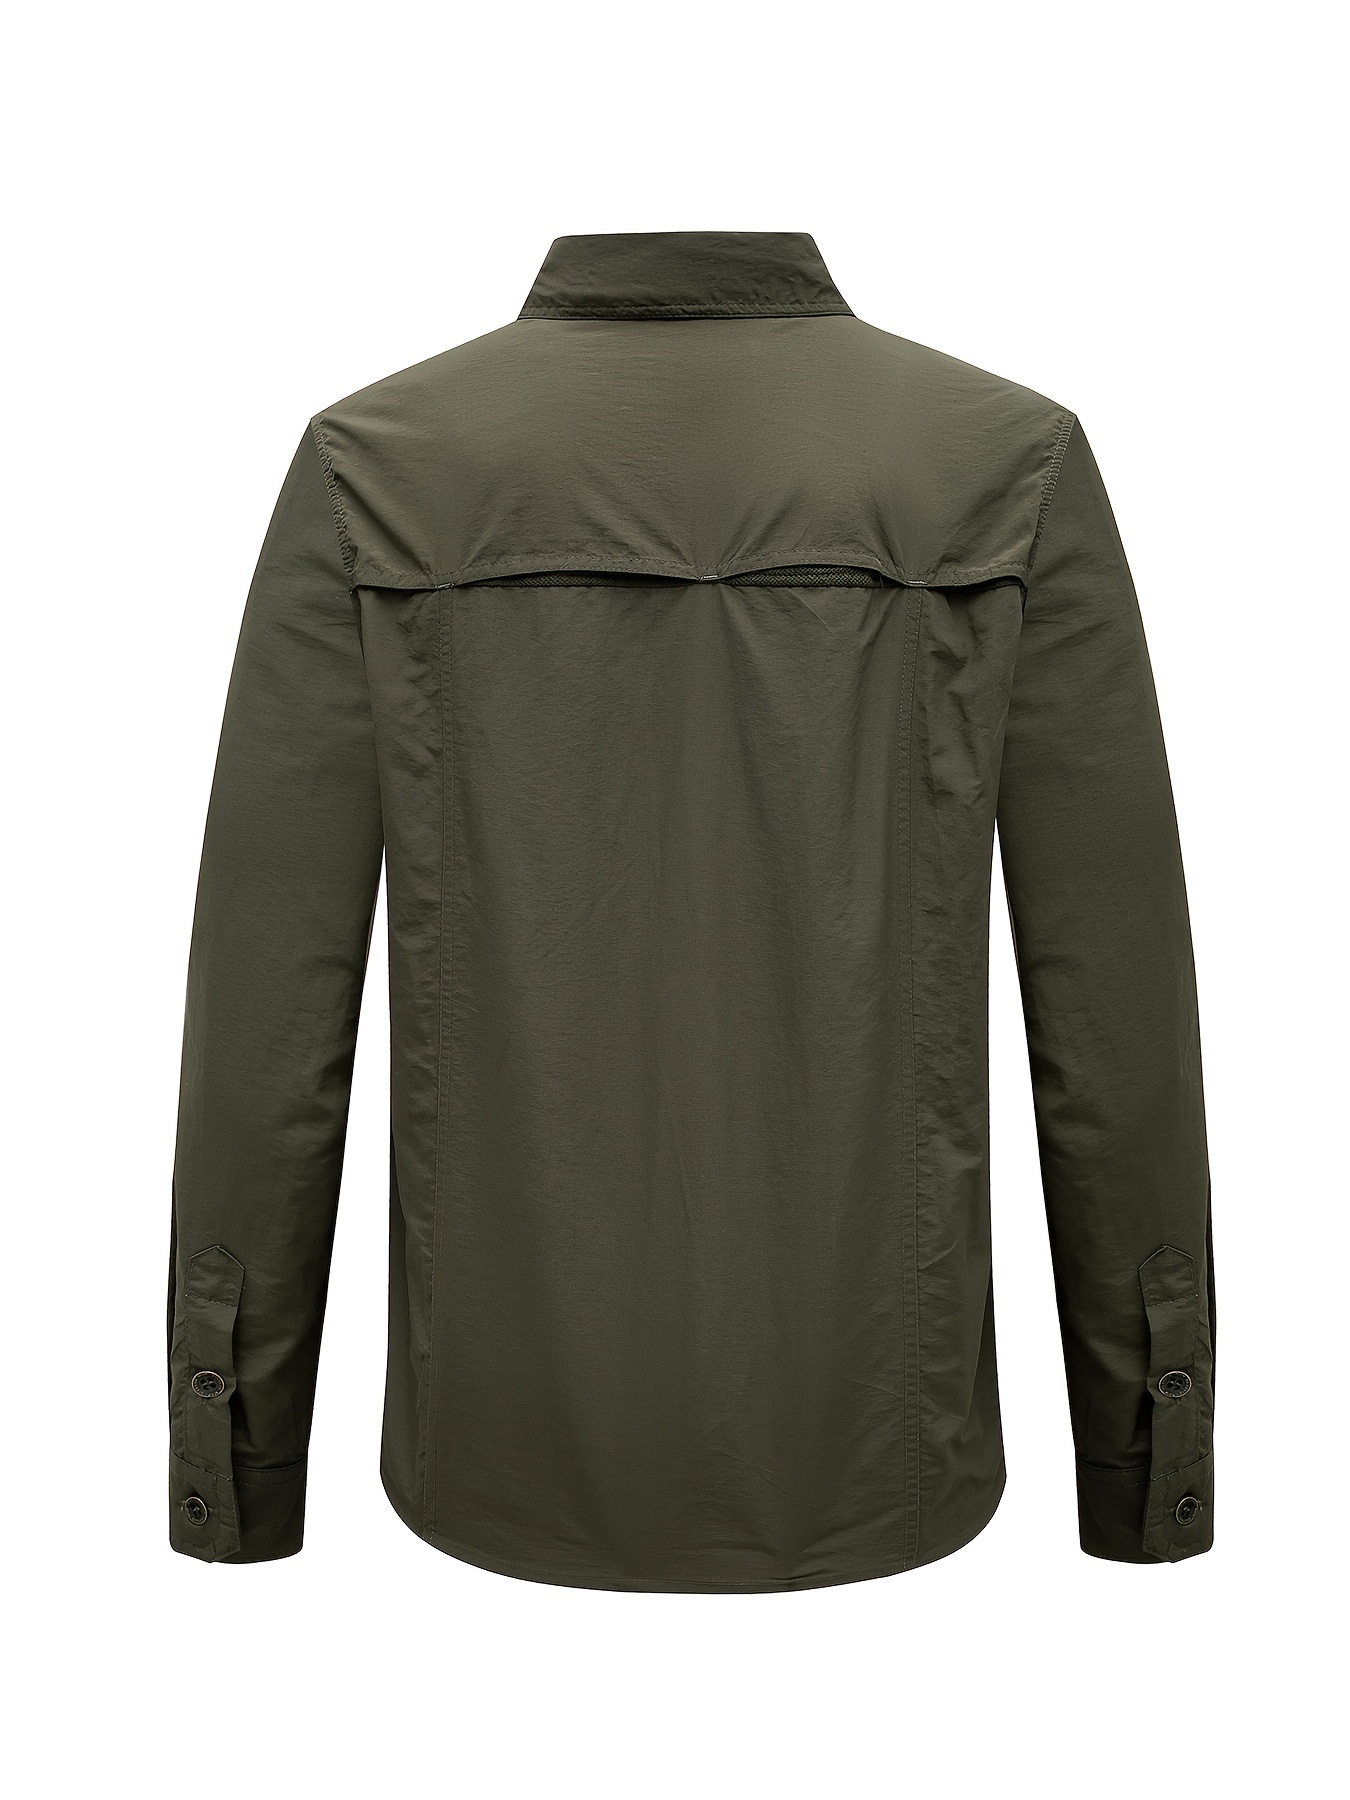 Mens Shirts Quick Drying Long Sleeve Casual Shirt Army Military Hiking  Outdoor